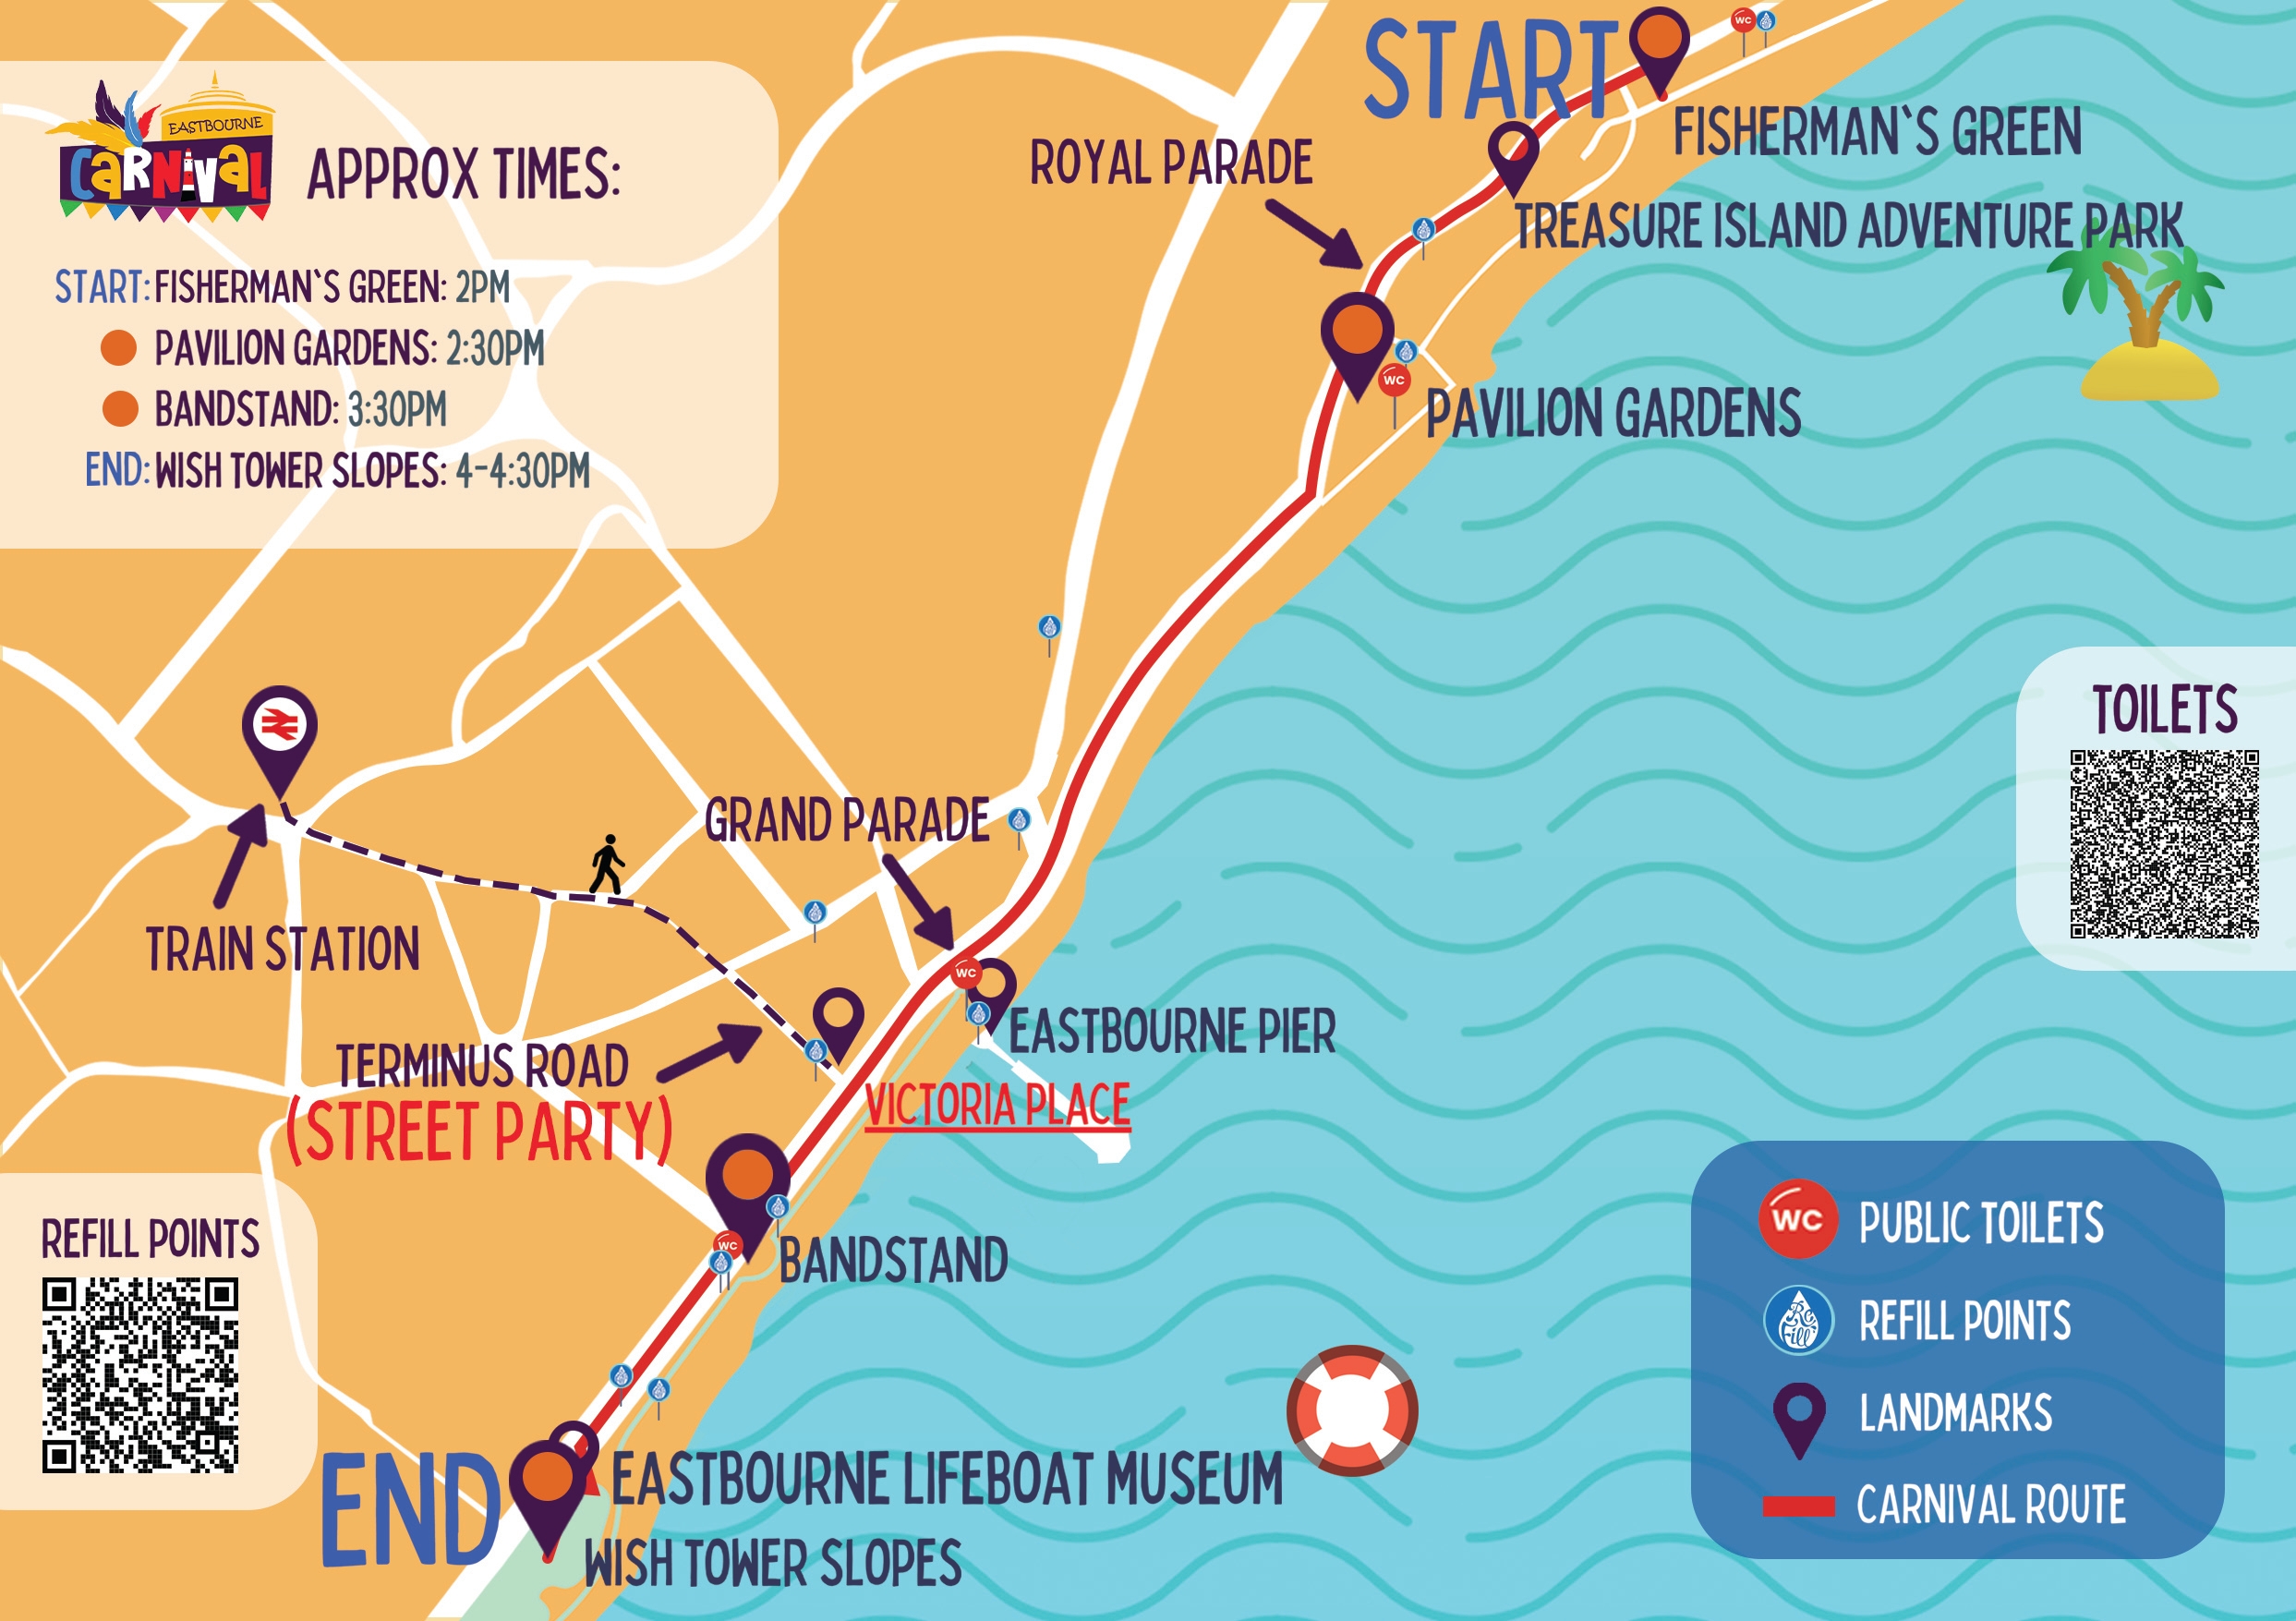 CARNIVAL ROUTE MAP UPDATED